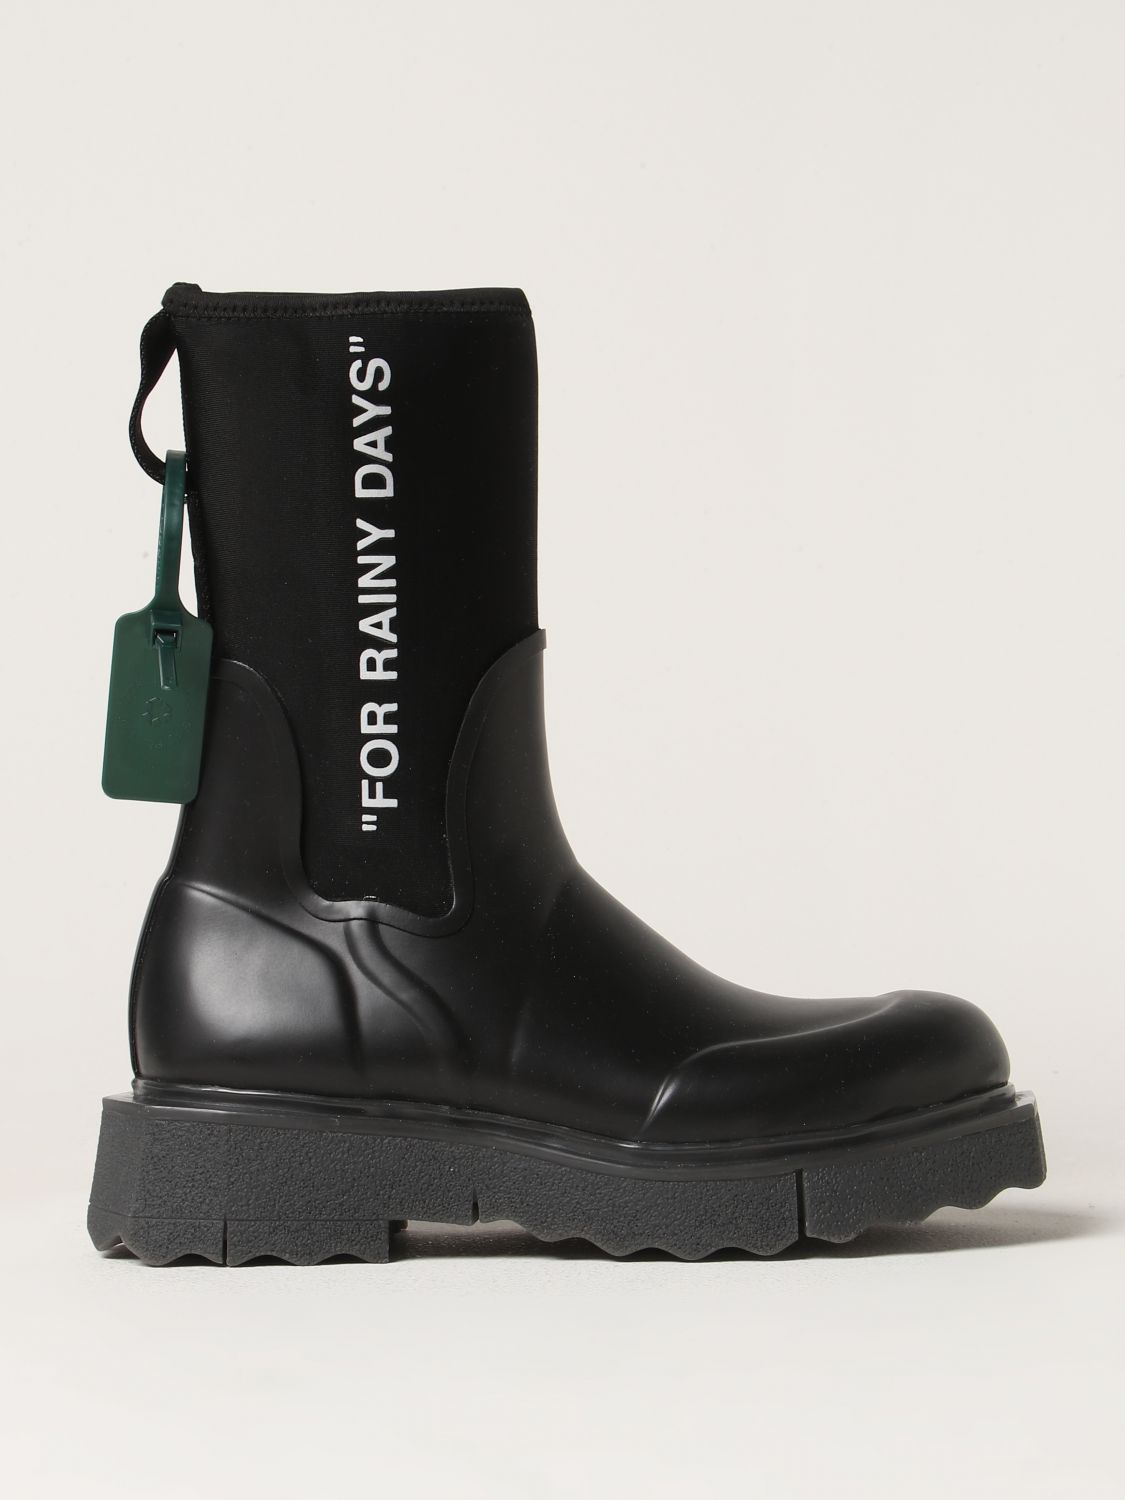 OFF-WHITE SPONGE ANKLE BOOTS IN RUBBERIZED LEATHER AND NEOPRENE,399706002